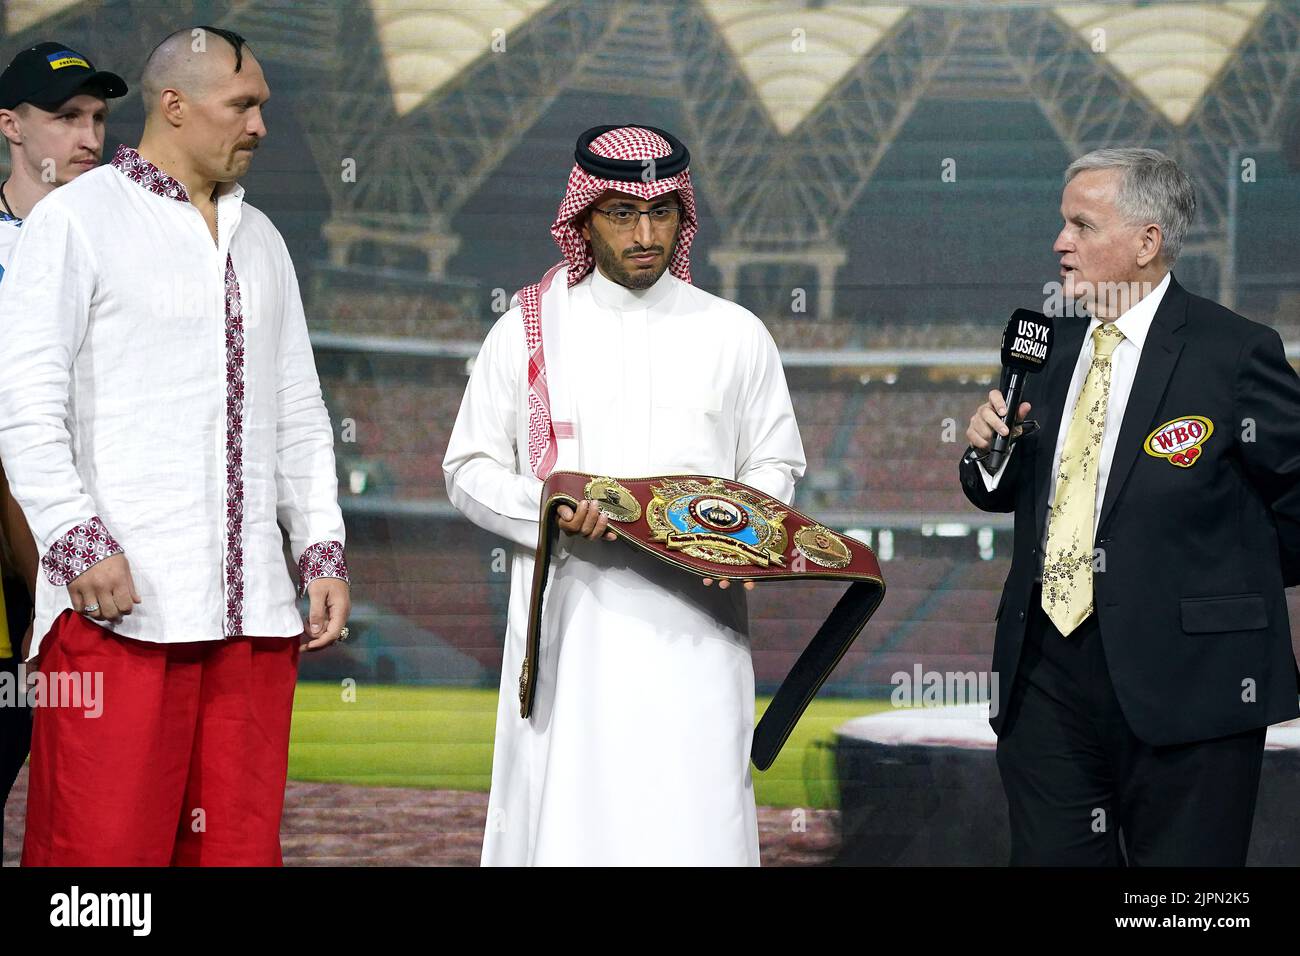 Prince Fahad Bin Abdulaziz Al Saud (centre) presents Oleksandr Usyk (left) with the new WBO Heavyweight Super World Title belt during the weigh in at the King Abdullah Sport City Stadium in Jeddah, Saudi Arabia. Picture date: Friday August 19, 2022. Stock Photo